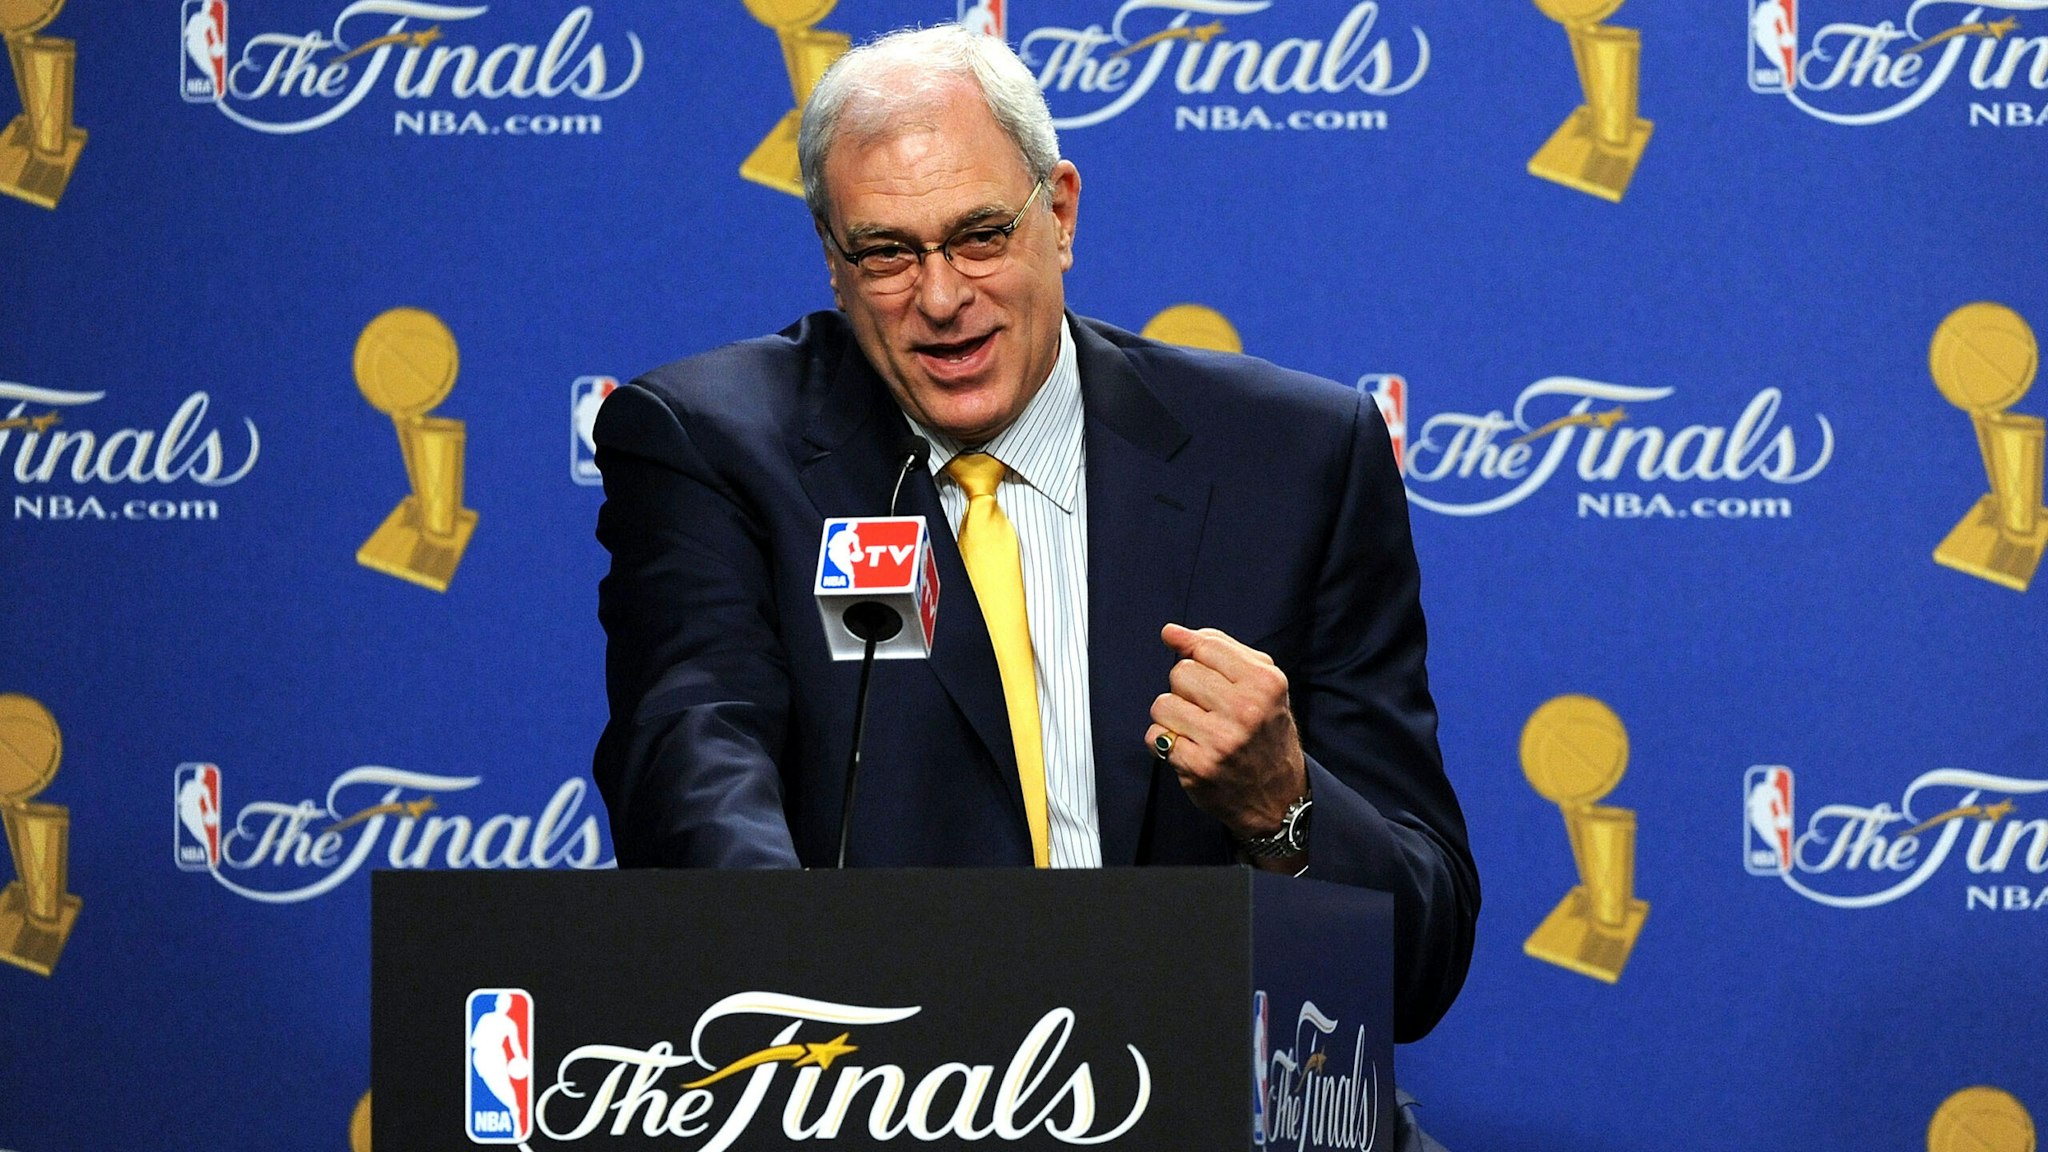 LOS ANGELES, CA - JUNE 17: Head coach Phil Jackson of the Los Angeles Lakers speaks during a pregame news conference before taking on the Boston Celtics in Game Seven of the 2010 NBA Finals at Staples Center on June 17, 2010 in Los Angeles, California. NOTE TO USER: User expressly acknowledges and agrees that, by downloading and/or using this Photograph, user is consenting to the terms and conditions of the Getty Images License Agreement.